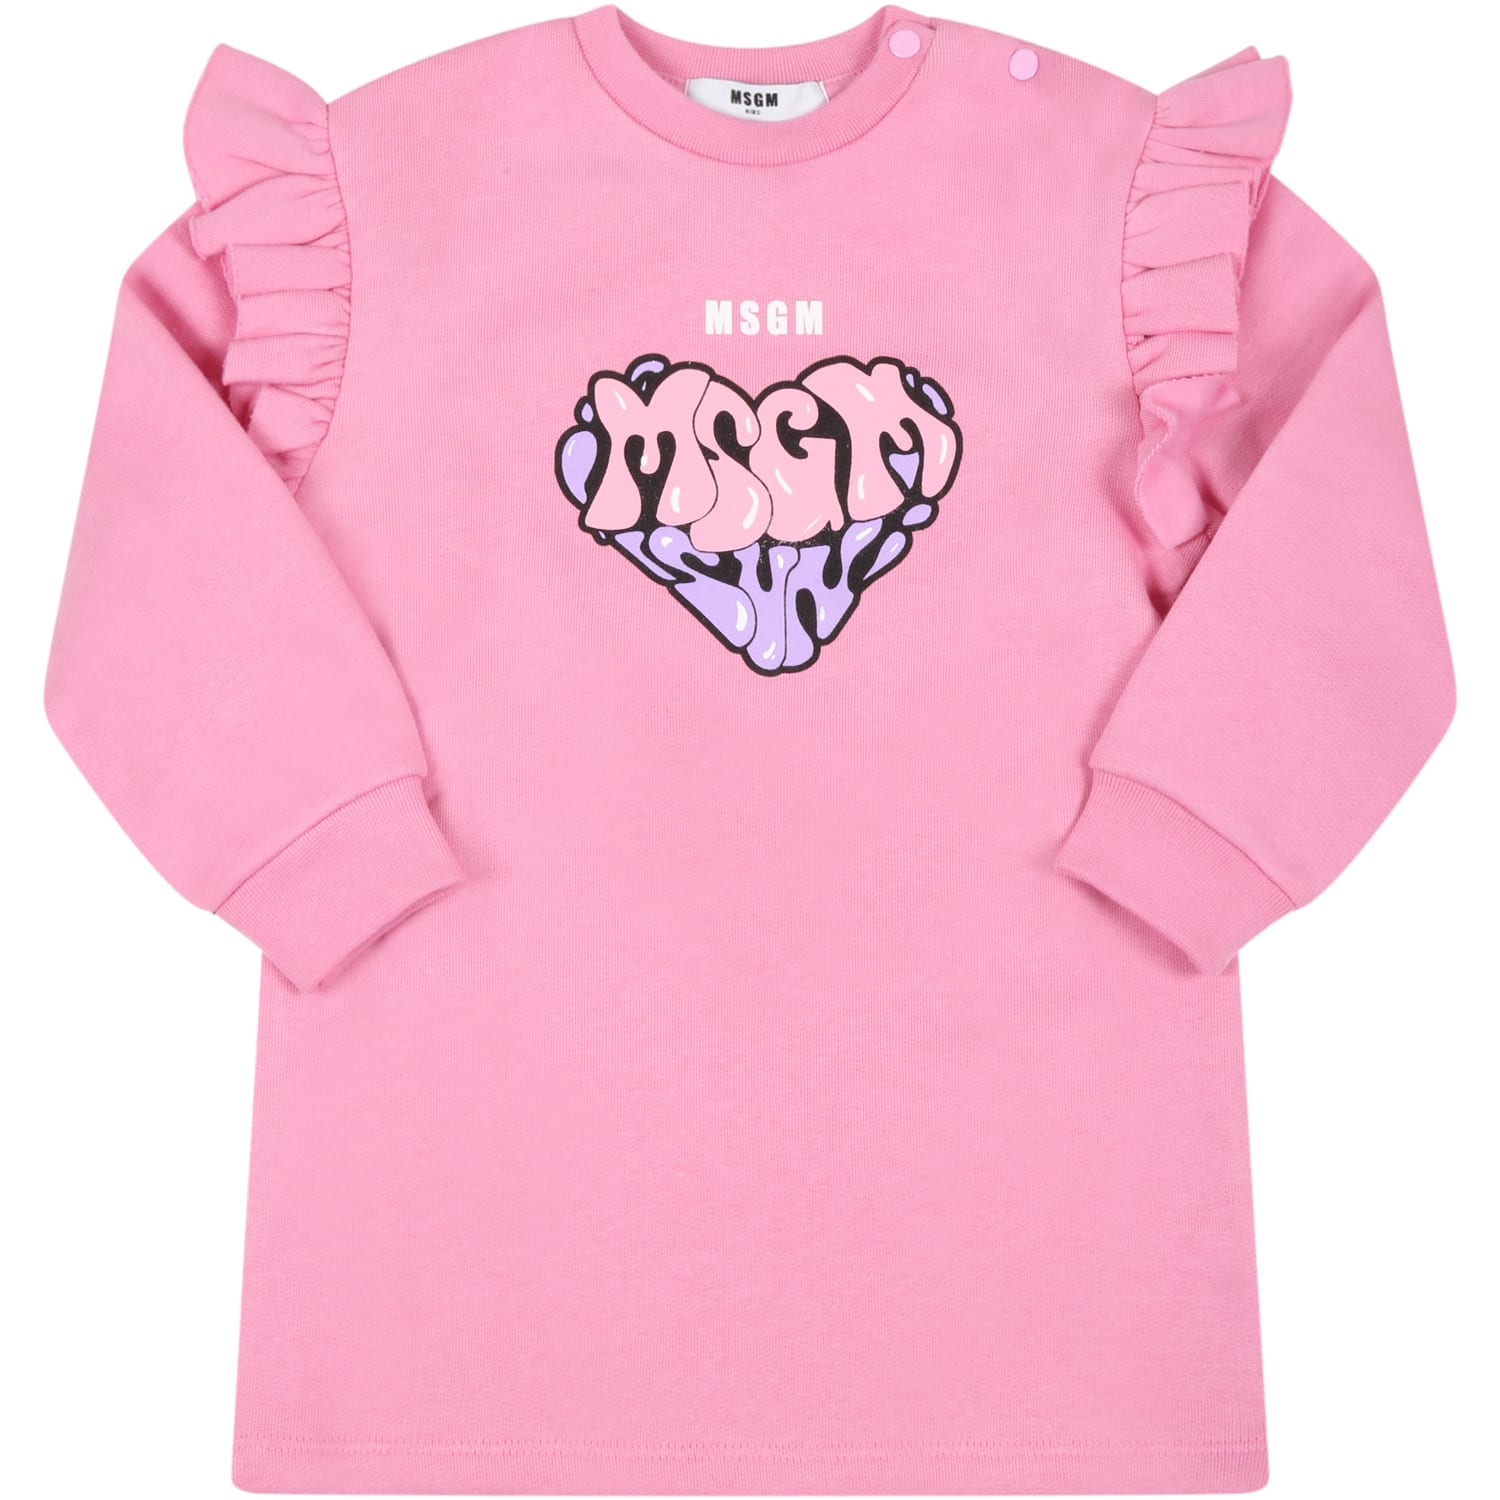 MSGM Pink Dress For Baby Girl With Logos